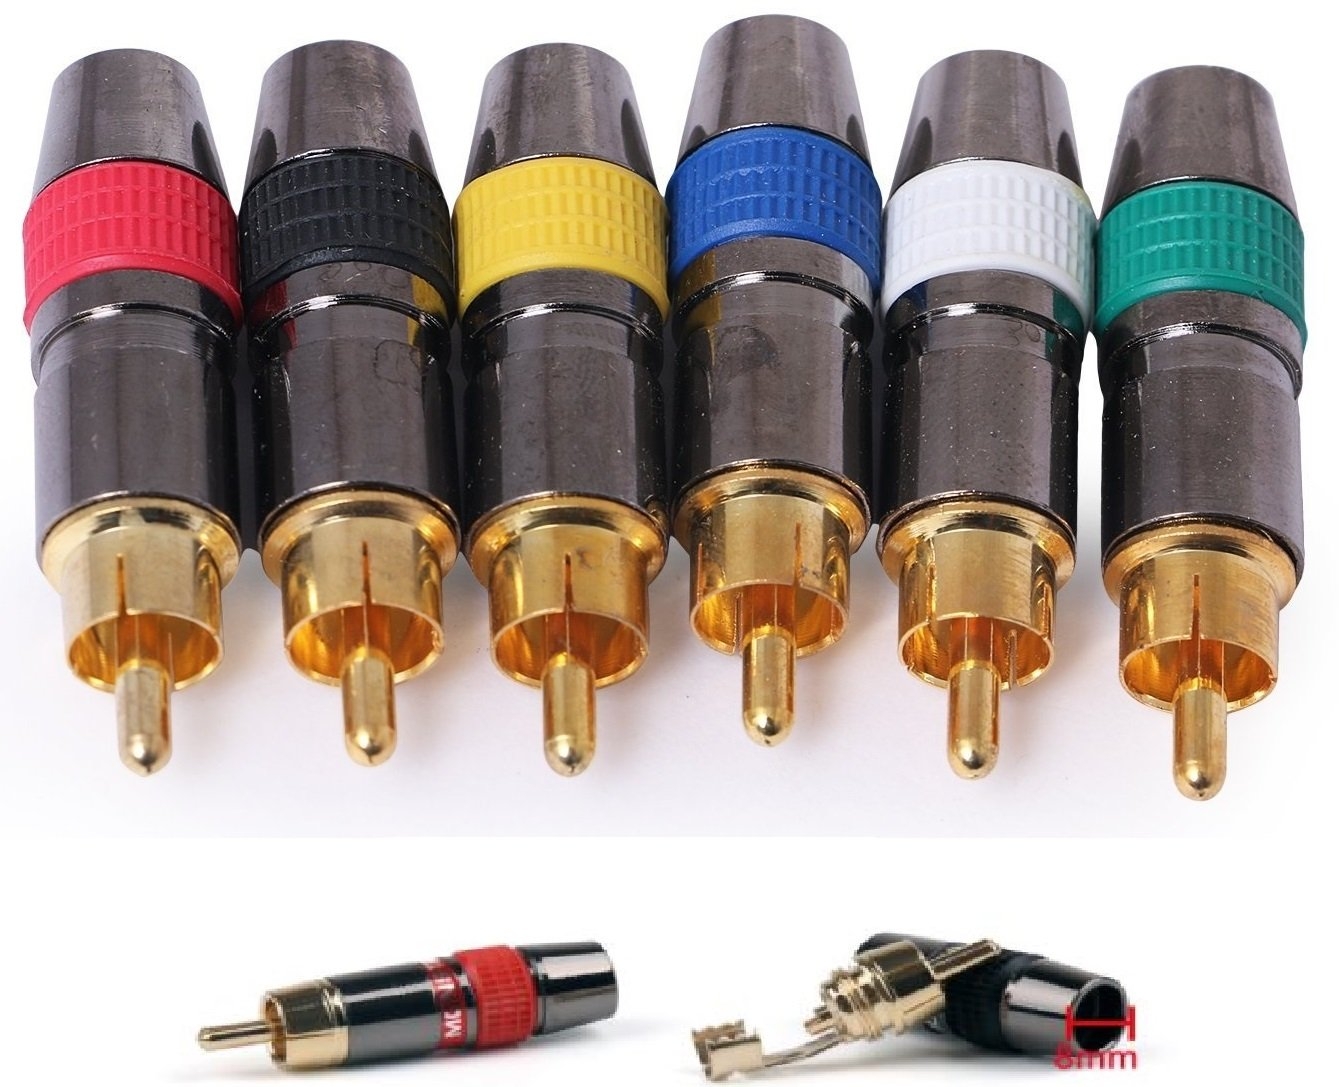 Metal Solderless RCA Male Connectors Screw Design - Audio/Video in-Line gold plated jack - 6 pcs